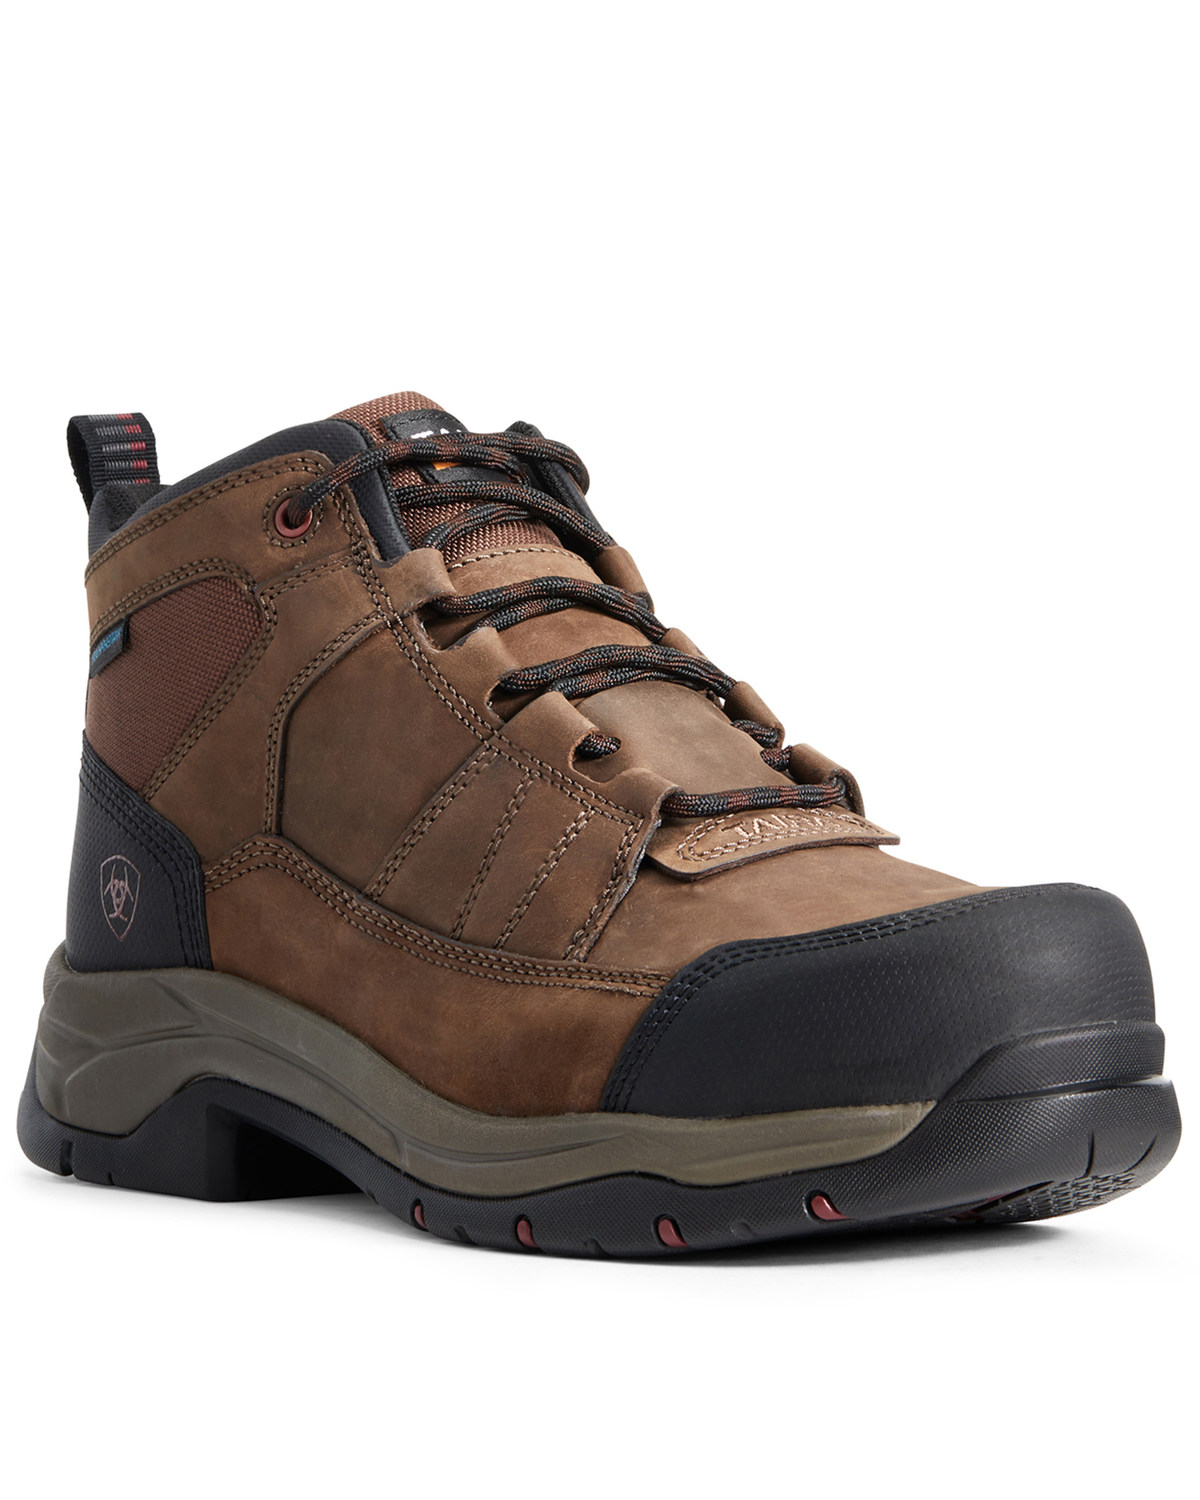 Ariat Telluride II H2O Mens Ariat outdoorschuh with lacing Copper 